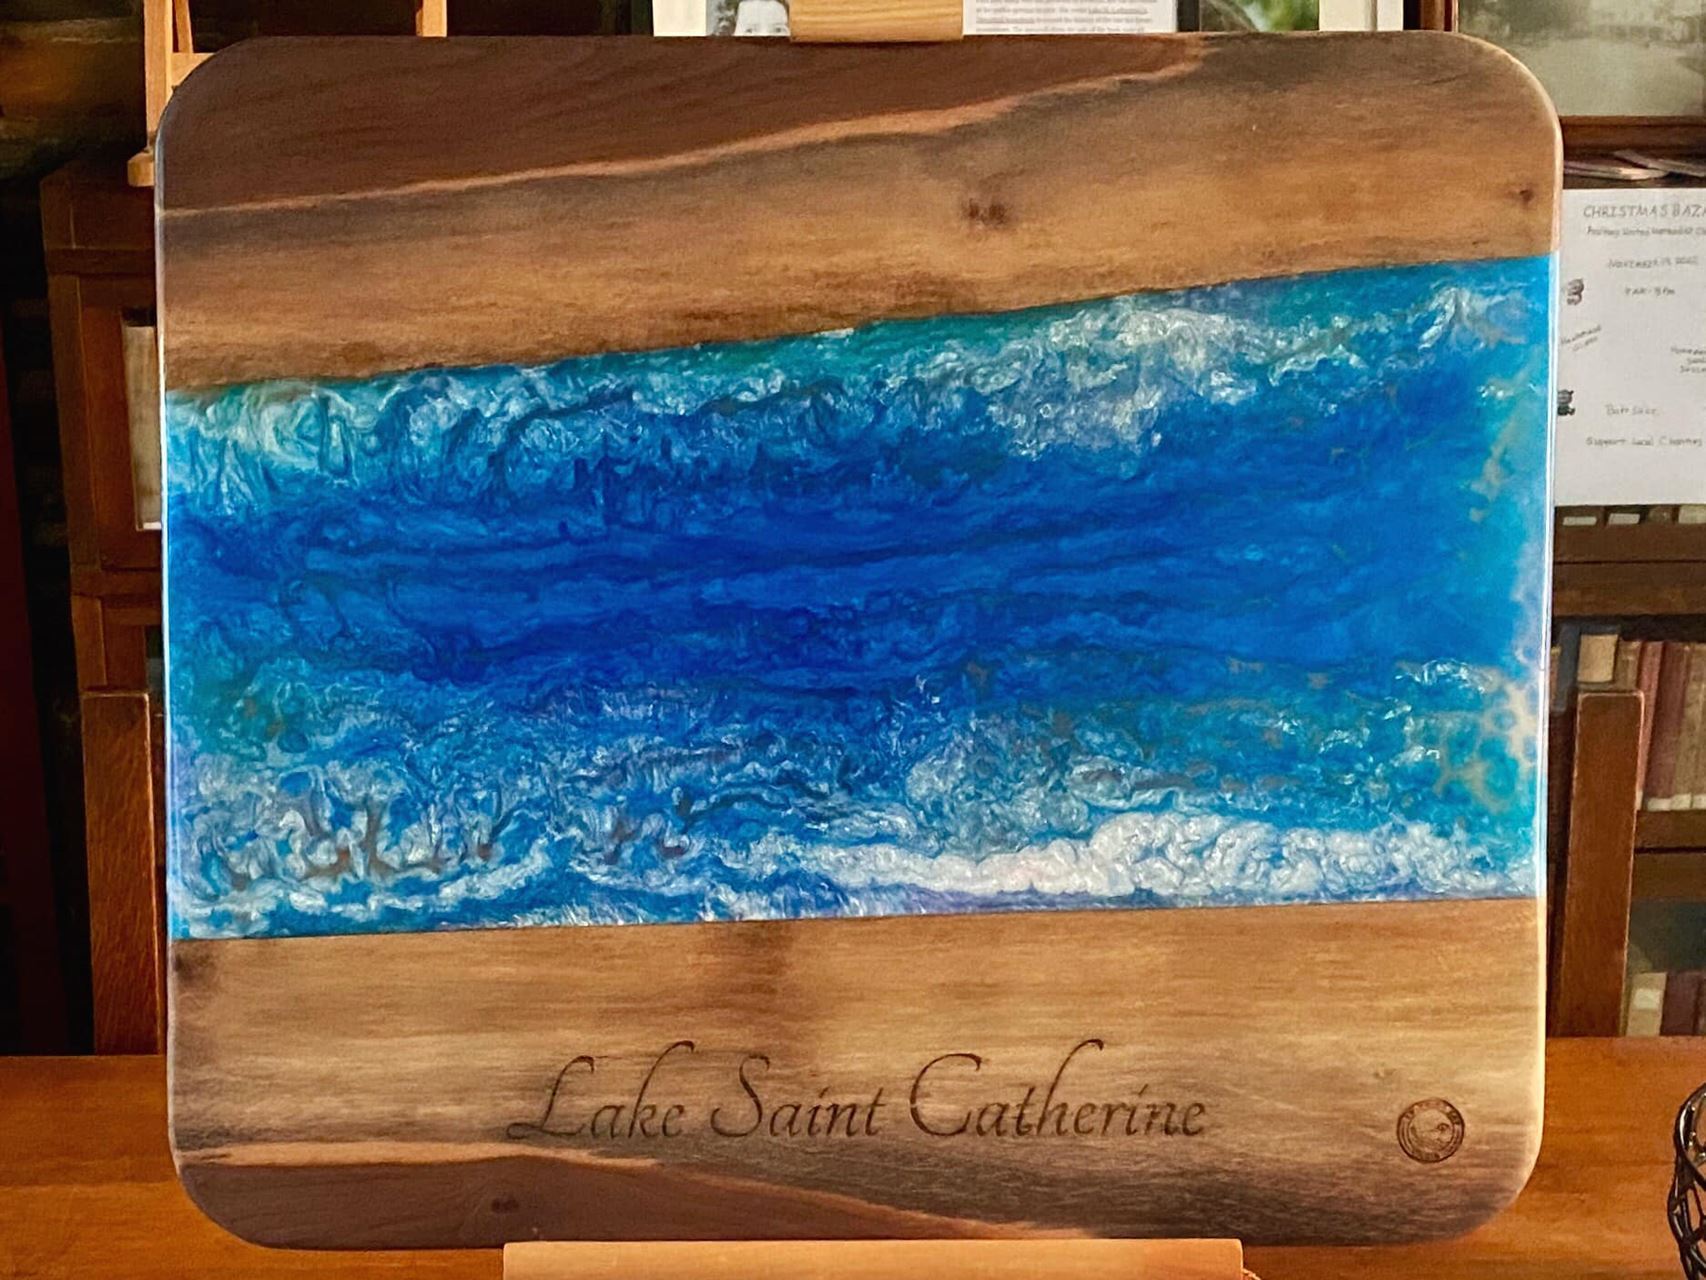 A custom-made walnut and epoxy charcuterie / cutting board engraved with Lake Saint Catherine from Swimming Dog Studios 